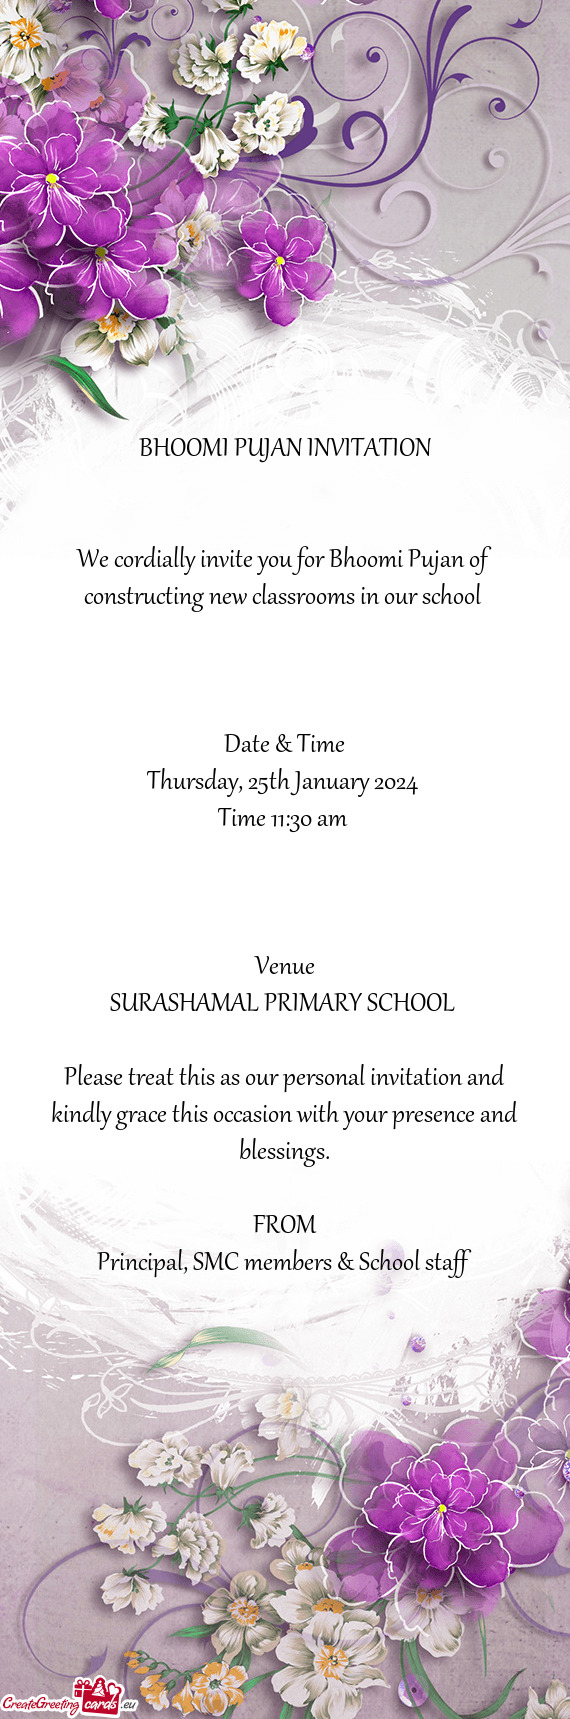 We cordially invite you for Bhoomi Pujan of constructing new classrooms in our school